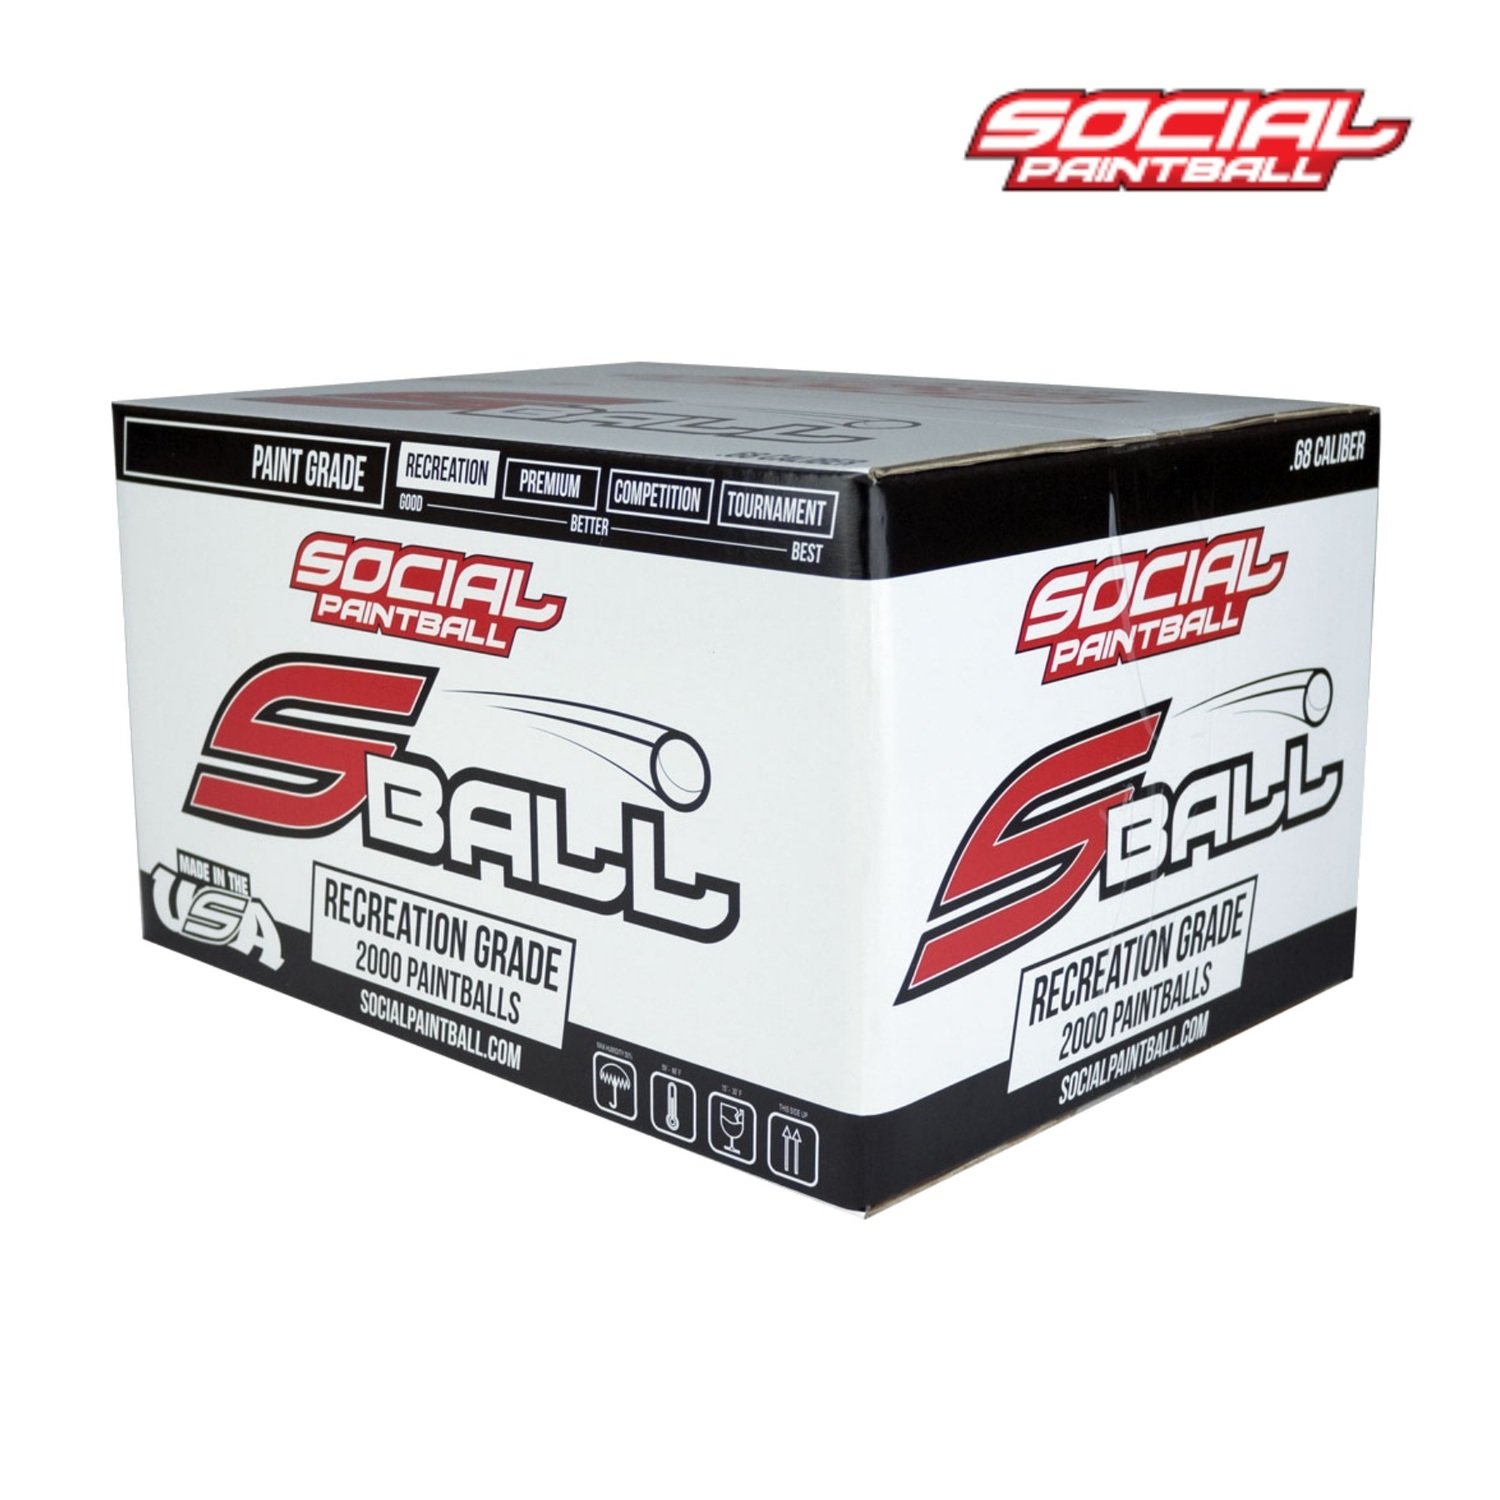 Social Paintball S Ball .68 cal Paintballs - Case of 2000 Rds - Yellow Fill